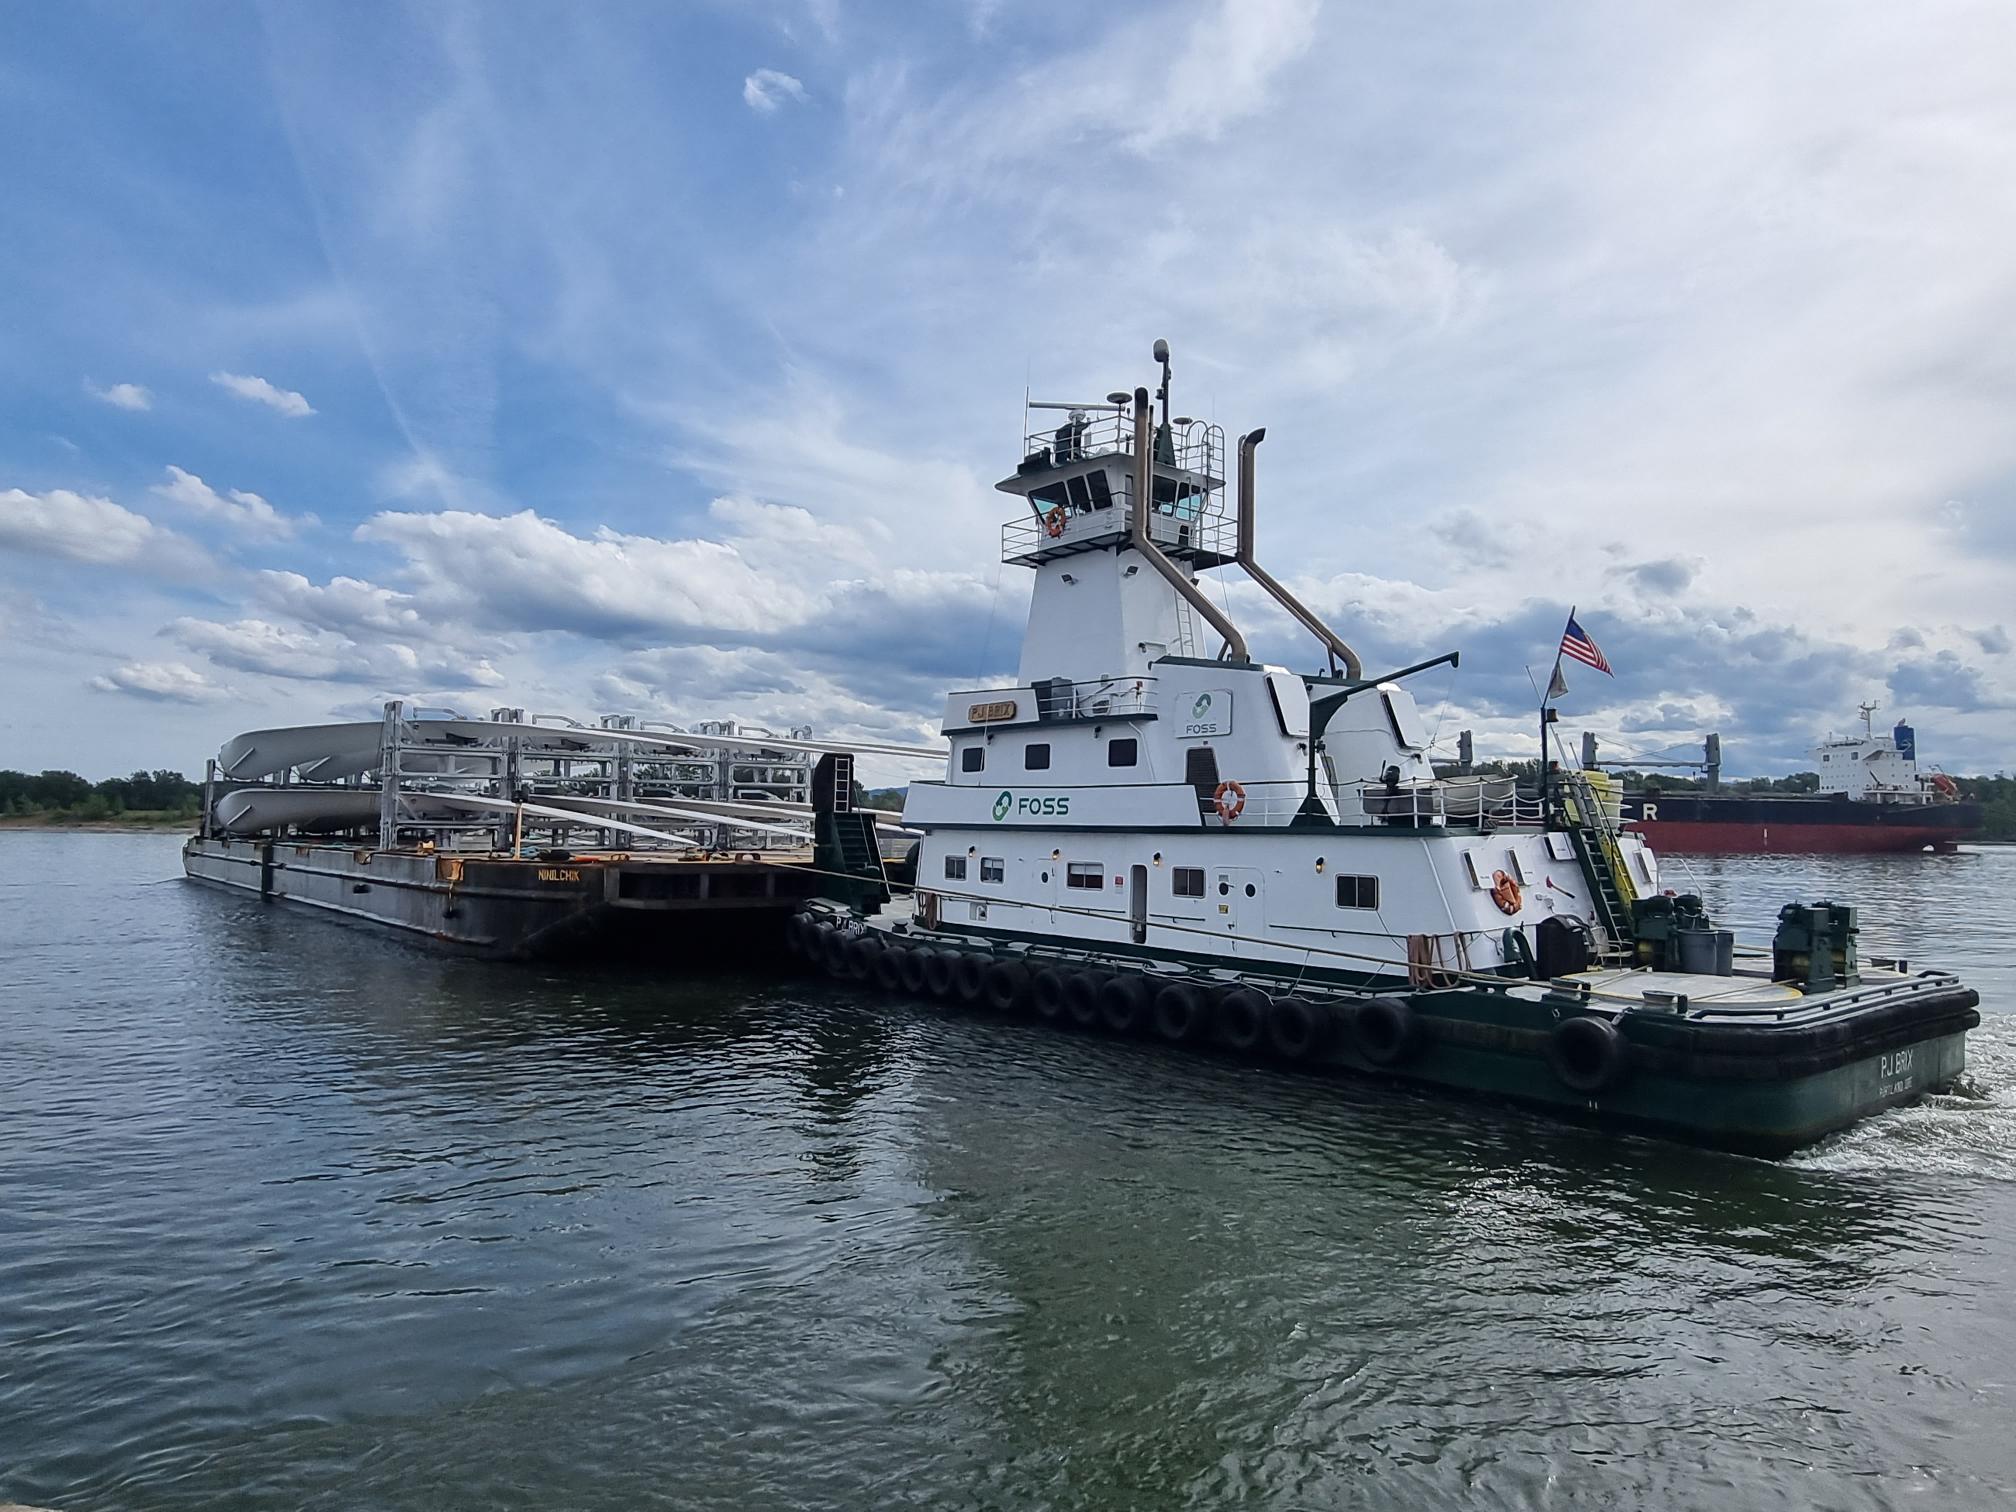 Pontoon with blades of a wind turbine is pushed by a tugboat